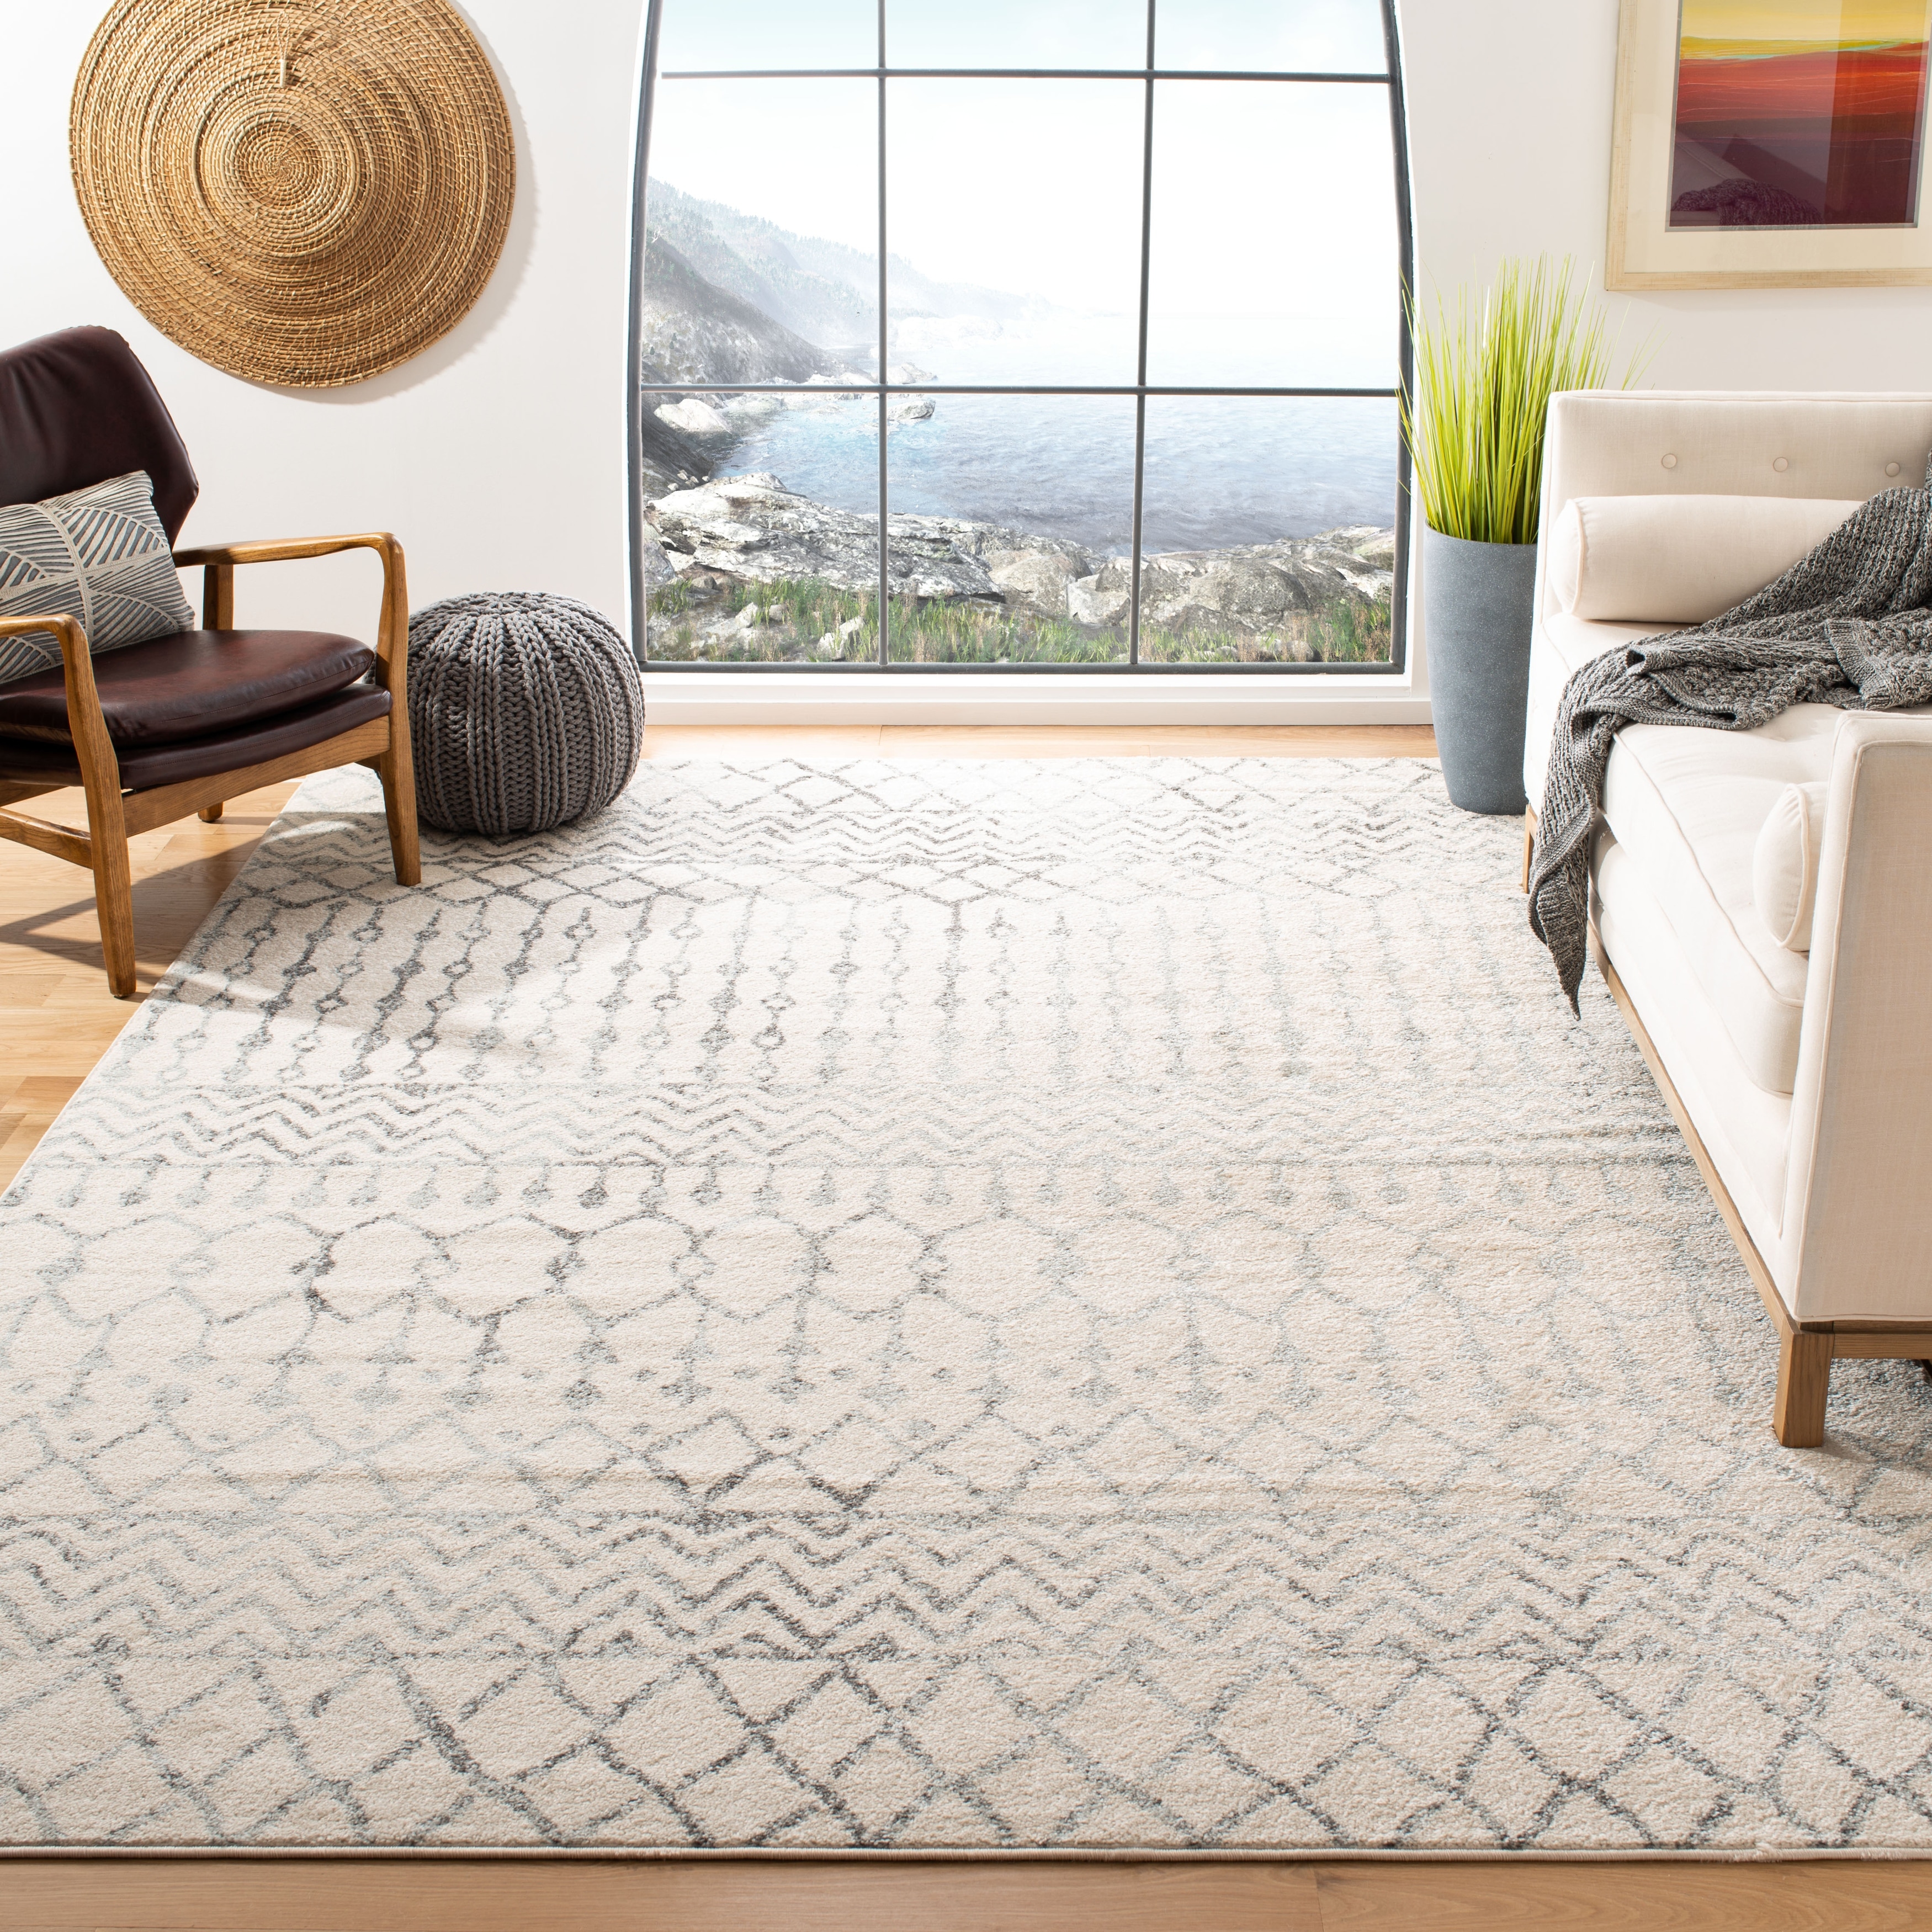 Ivory SAFAVIEH Tulum Collection TUL270A Moroccan Boho Distressed Non-Shedding Dining Room Entryway Foyer Living Room Bedroom Area Rug 5' x 5' Round Grey 